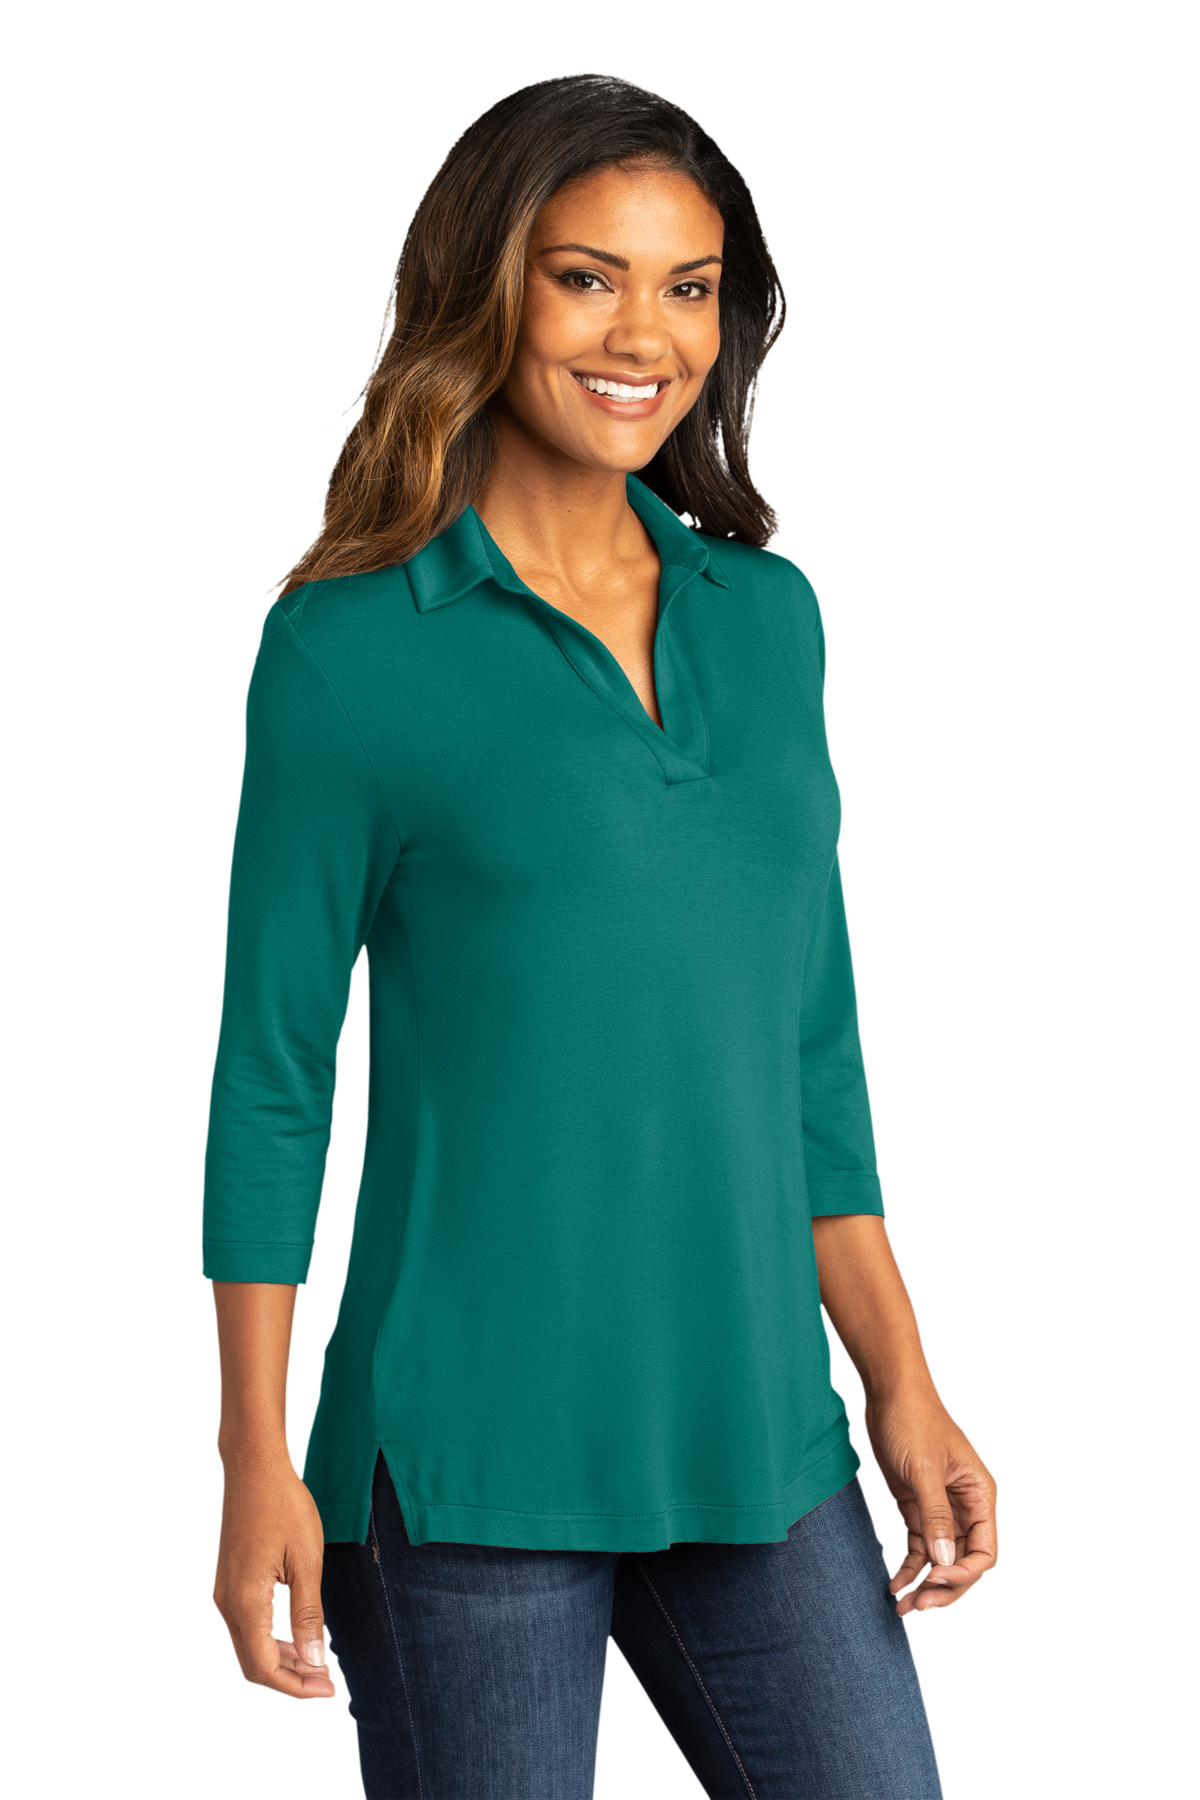 Port Authority Ladies Luxe Knit Jewel Neck Top, Product